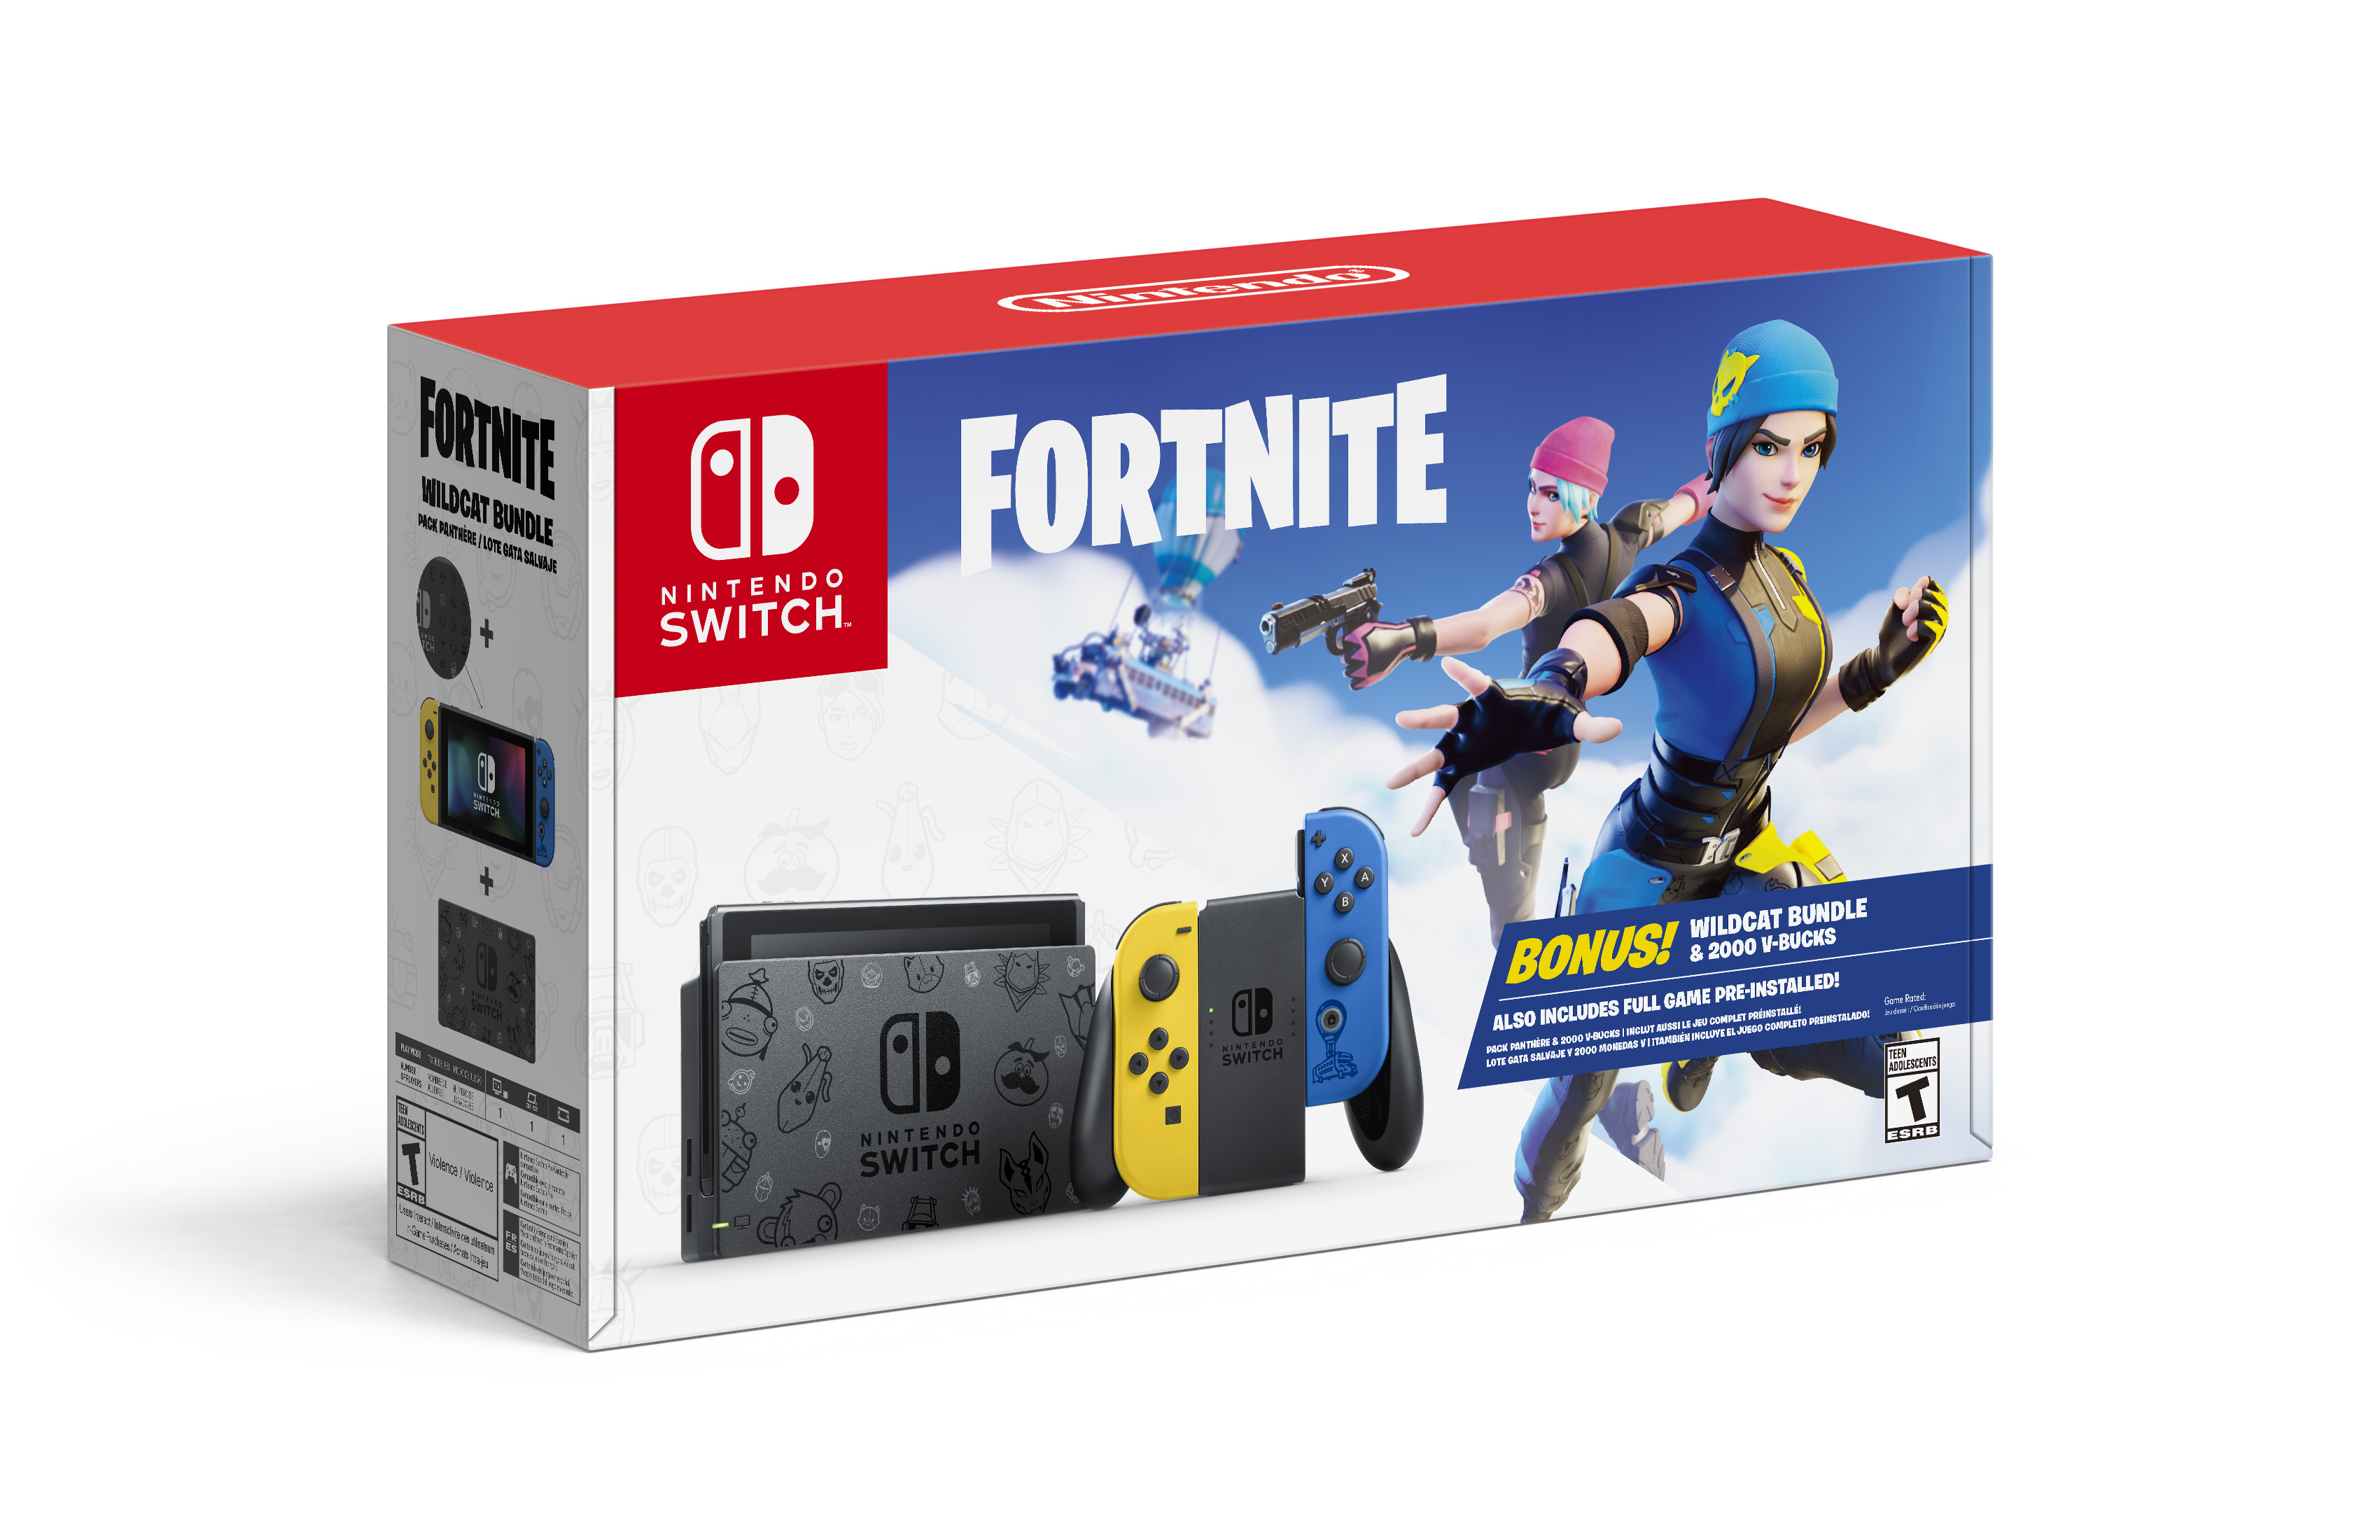 How much will the nintendo switch cost on cyber monday Nintendo Offers A Special Fortnite Nintendo Switch Bundle On Cyber Monday Business Wire